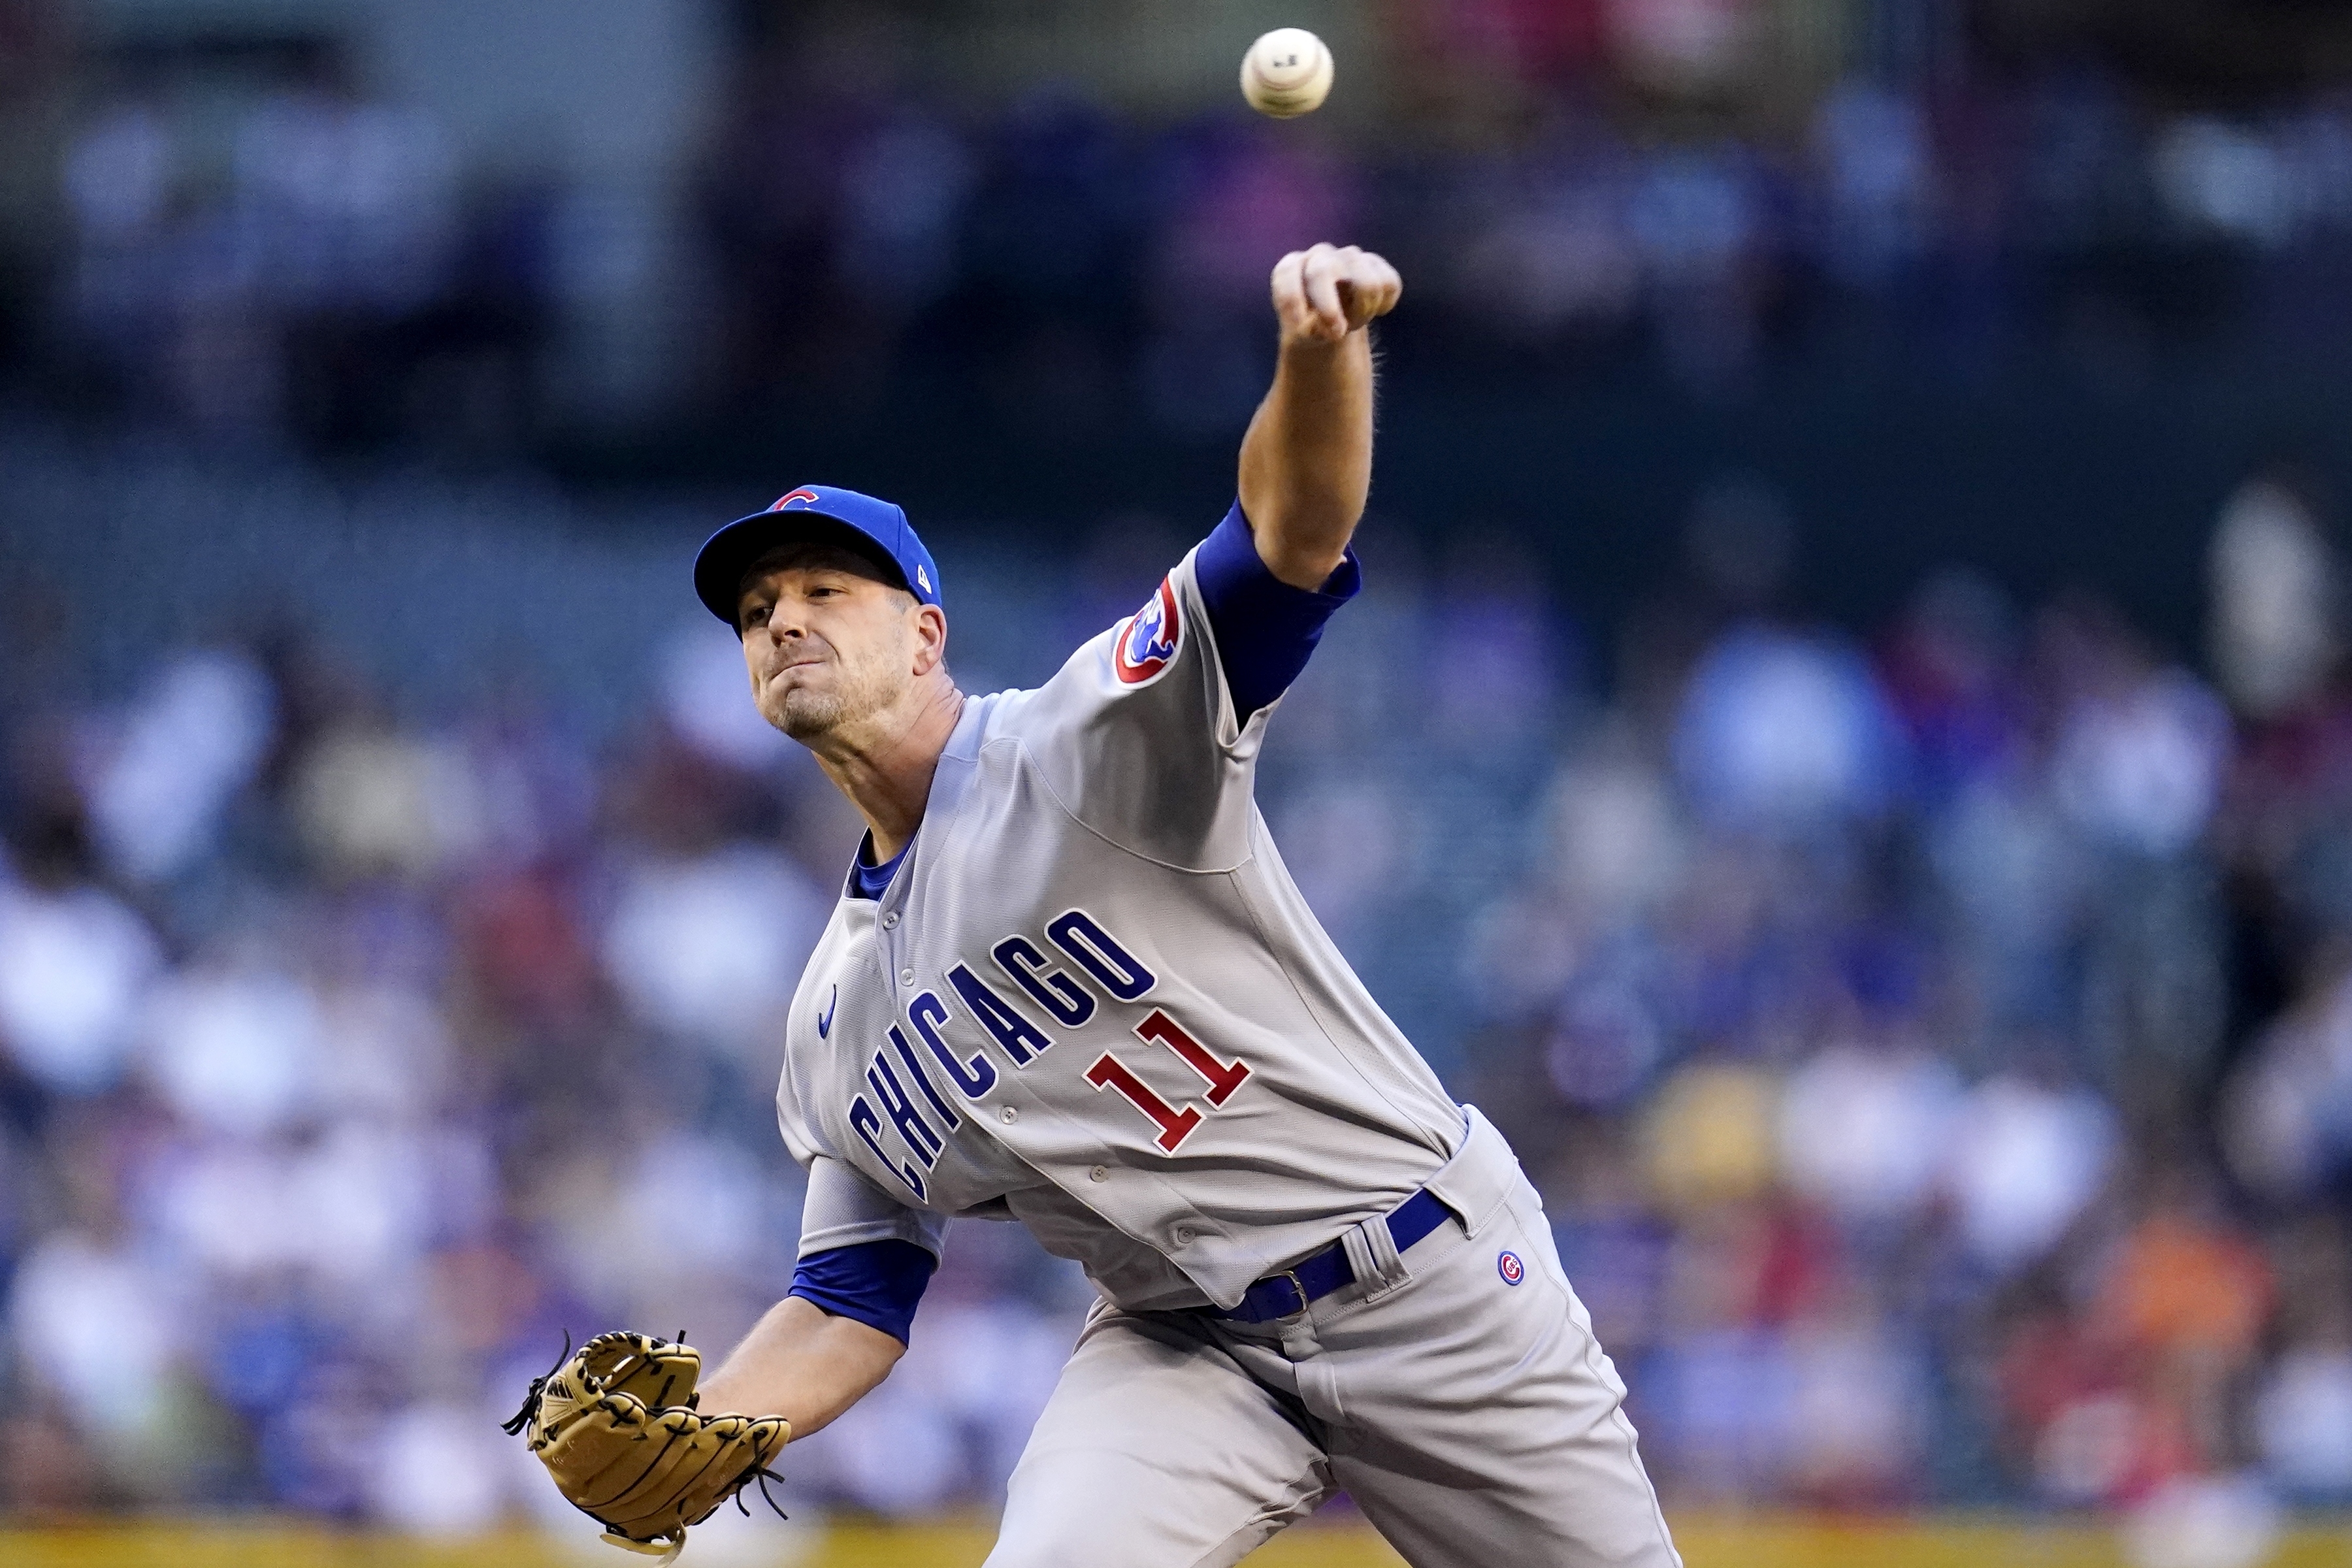 Drew Smyly: Chicago Cubs LHP on 10 years of service time